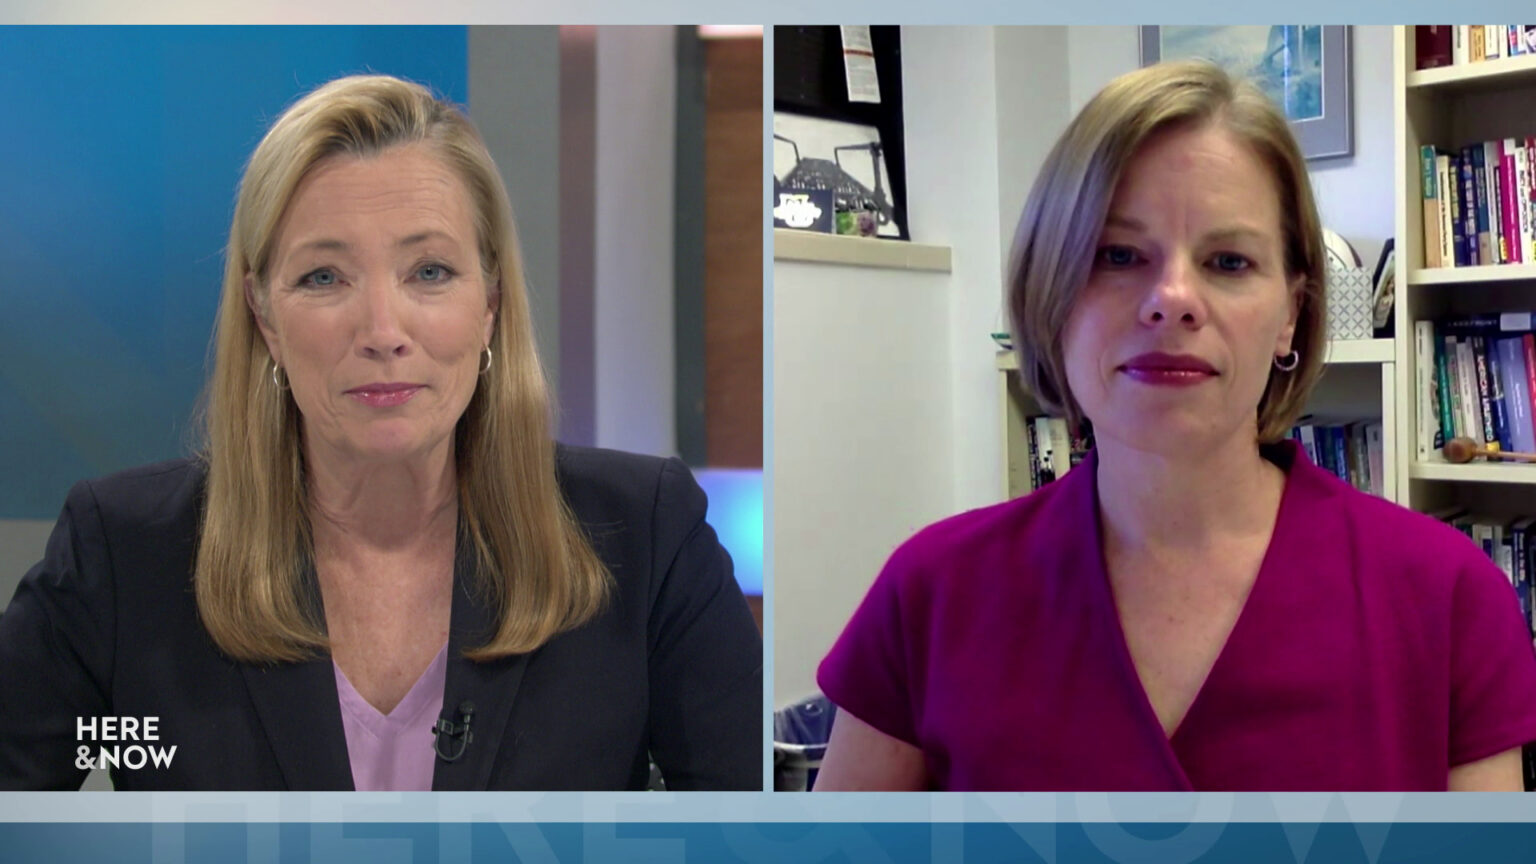 A split screen shows Frederica Freyberg and Amber Wichowsky in different locations.